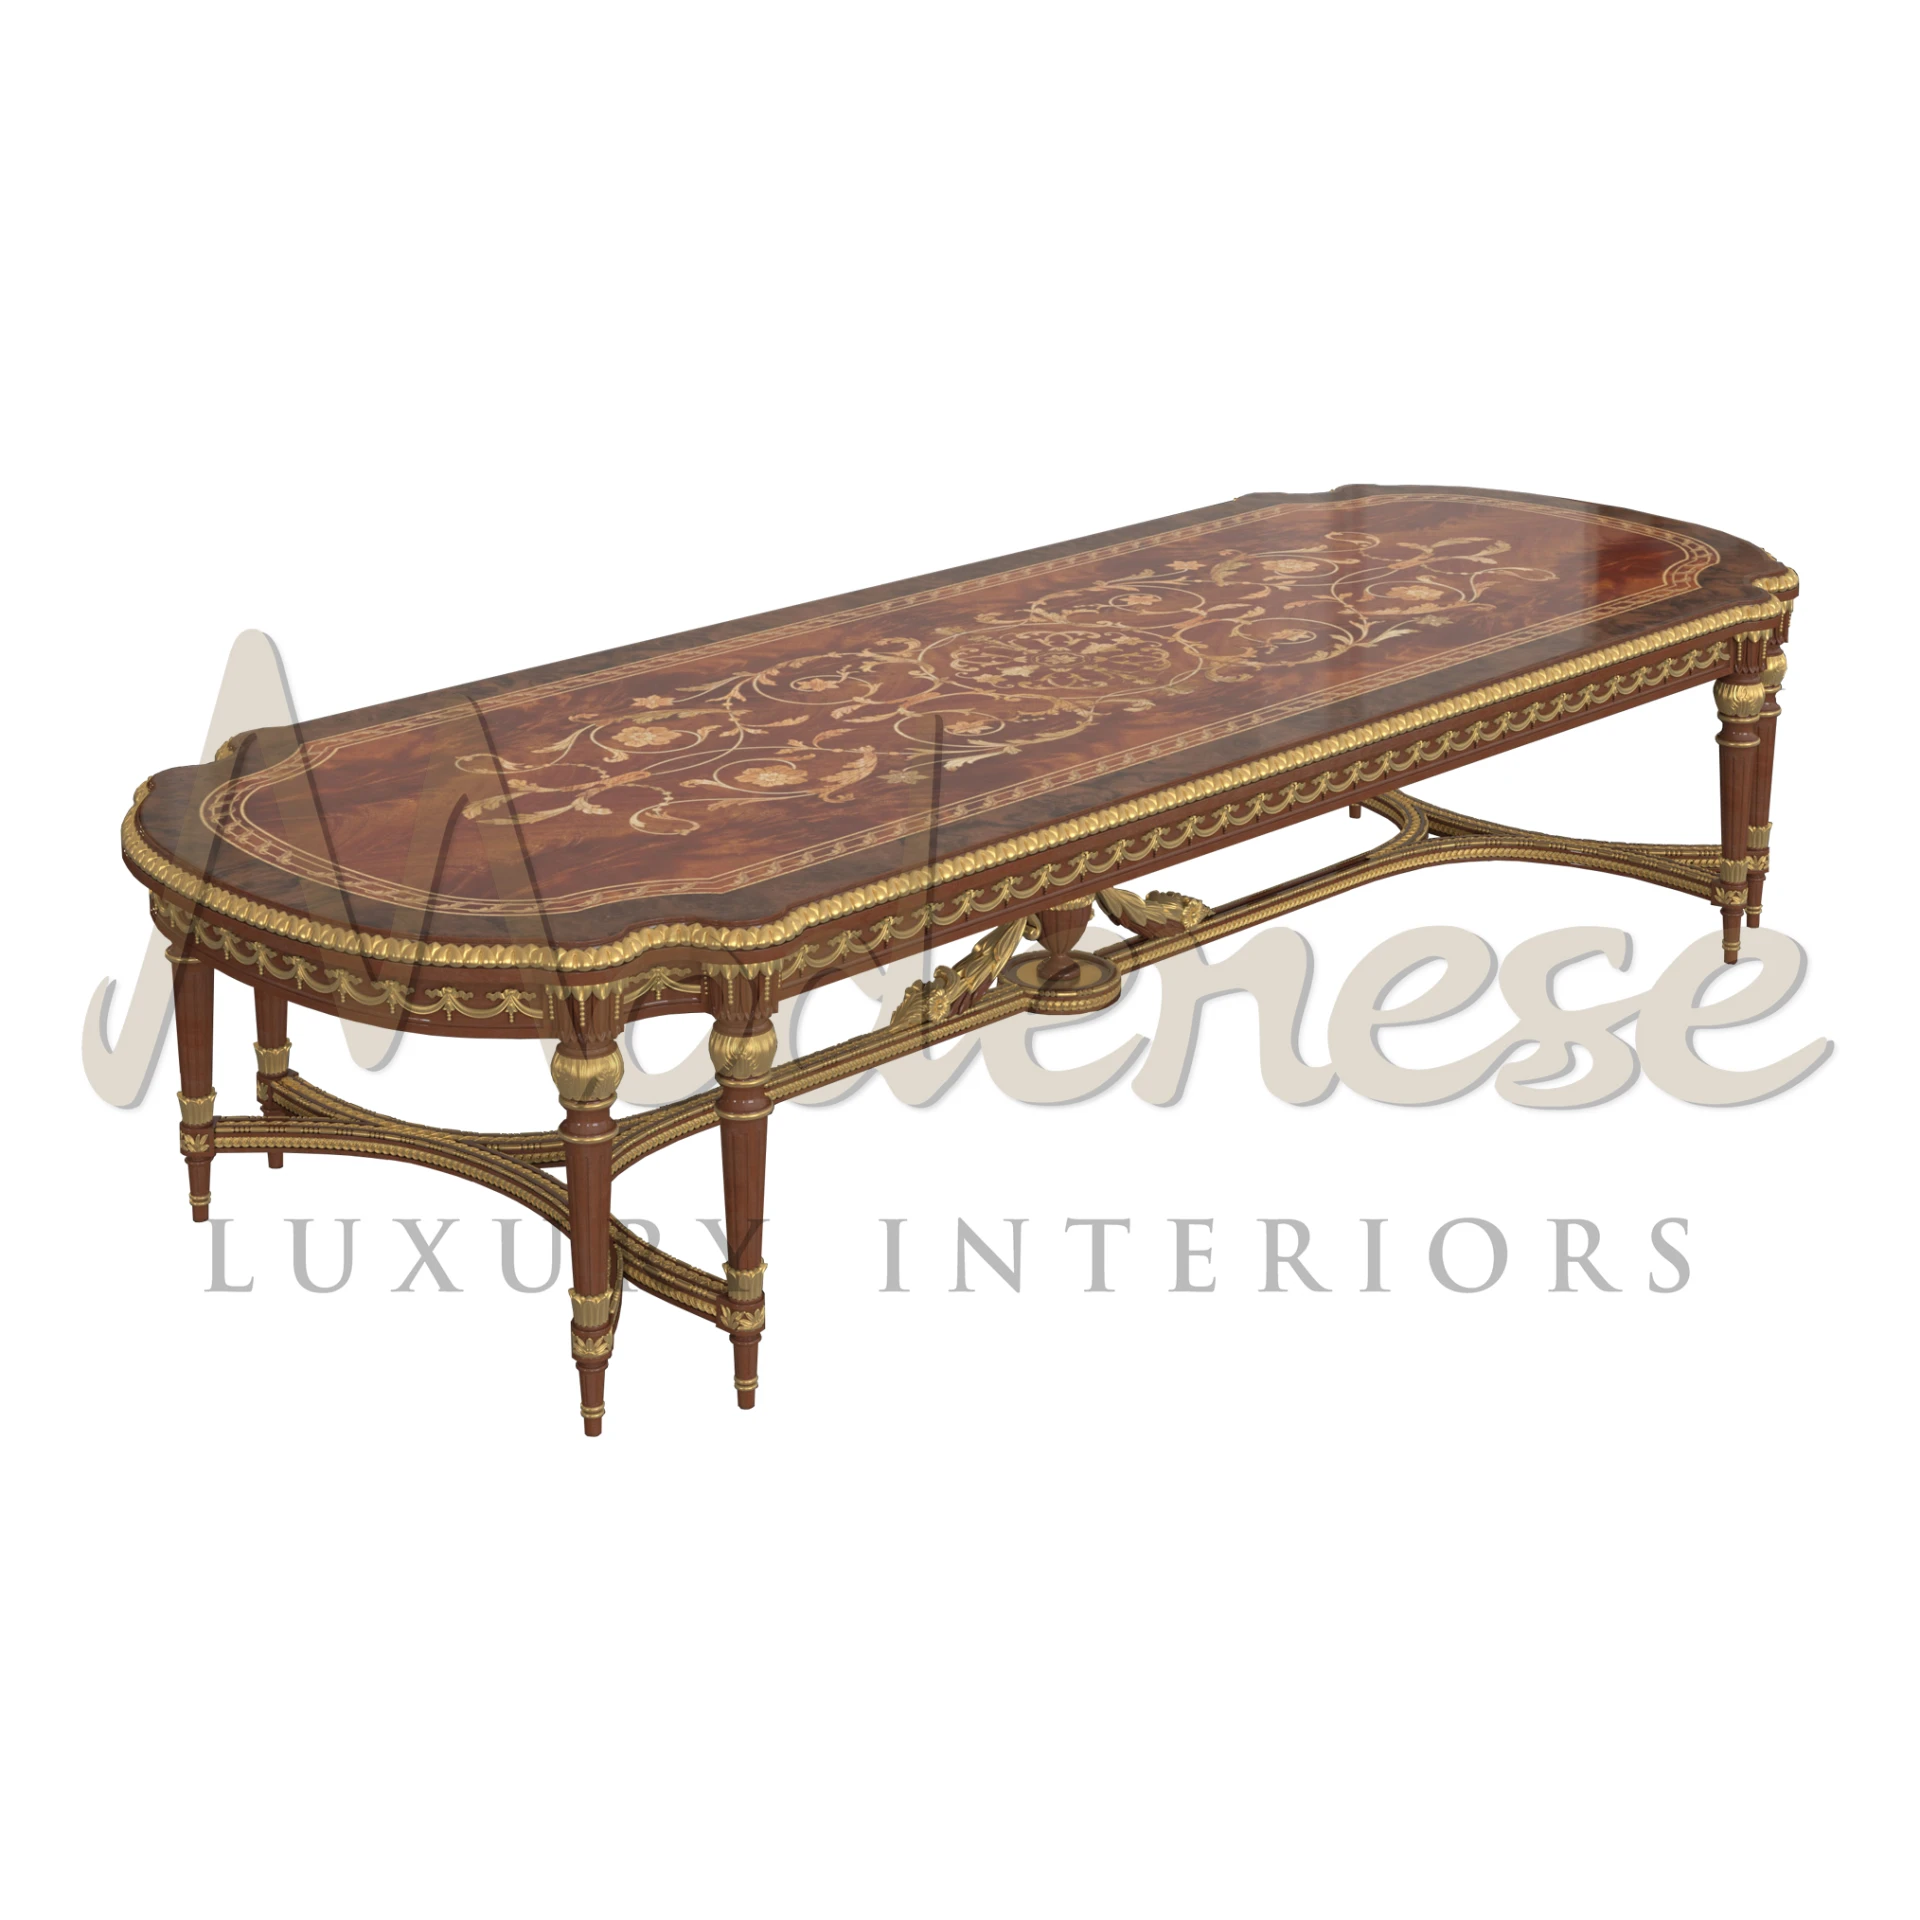 Seating for 10, intricate inlay design, adorned with golden motifs. Effortless elegance and nobility make a grand statement in any room.